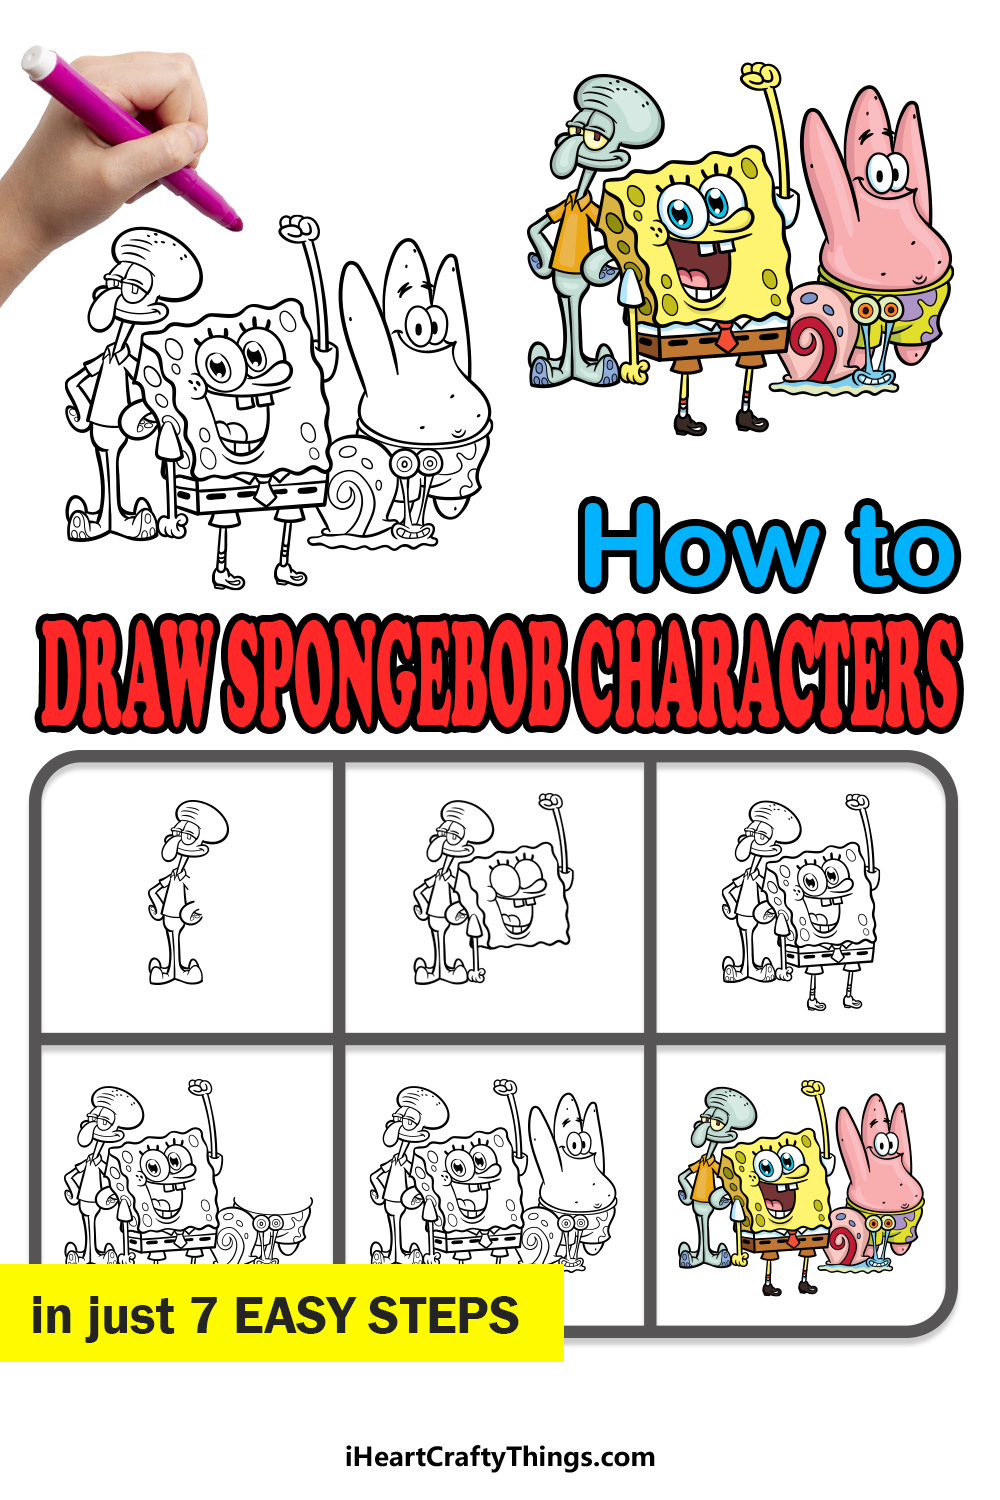 how to draw Spongebob characters in 7 easy steps